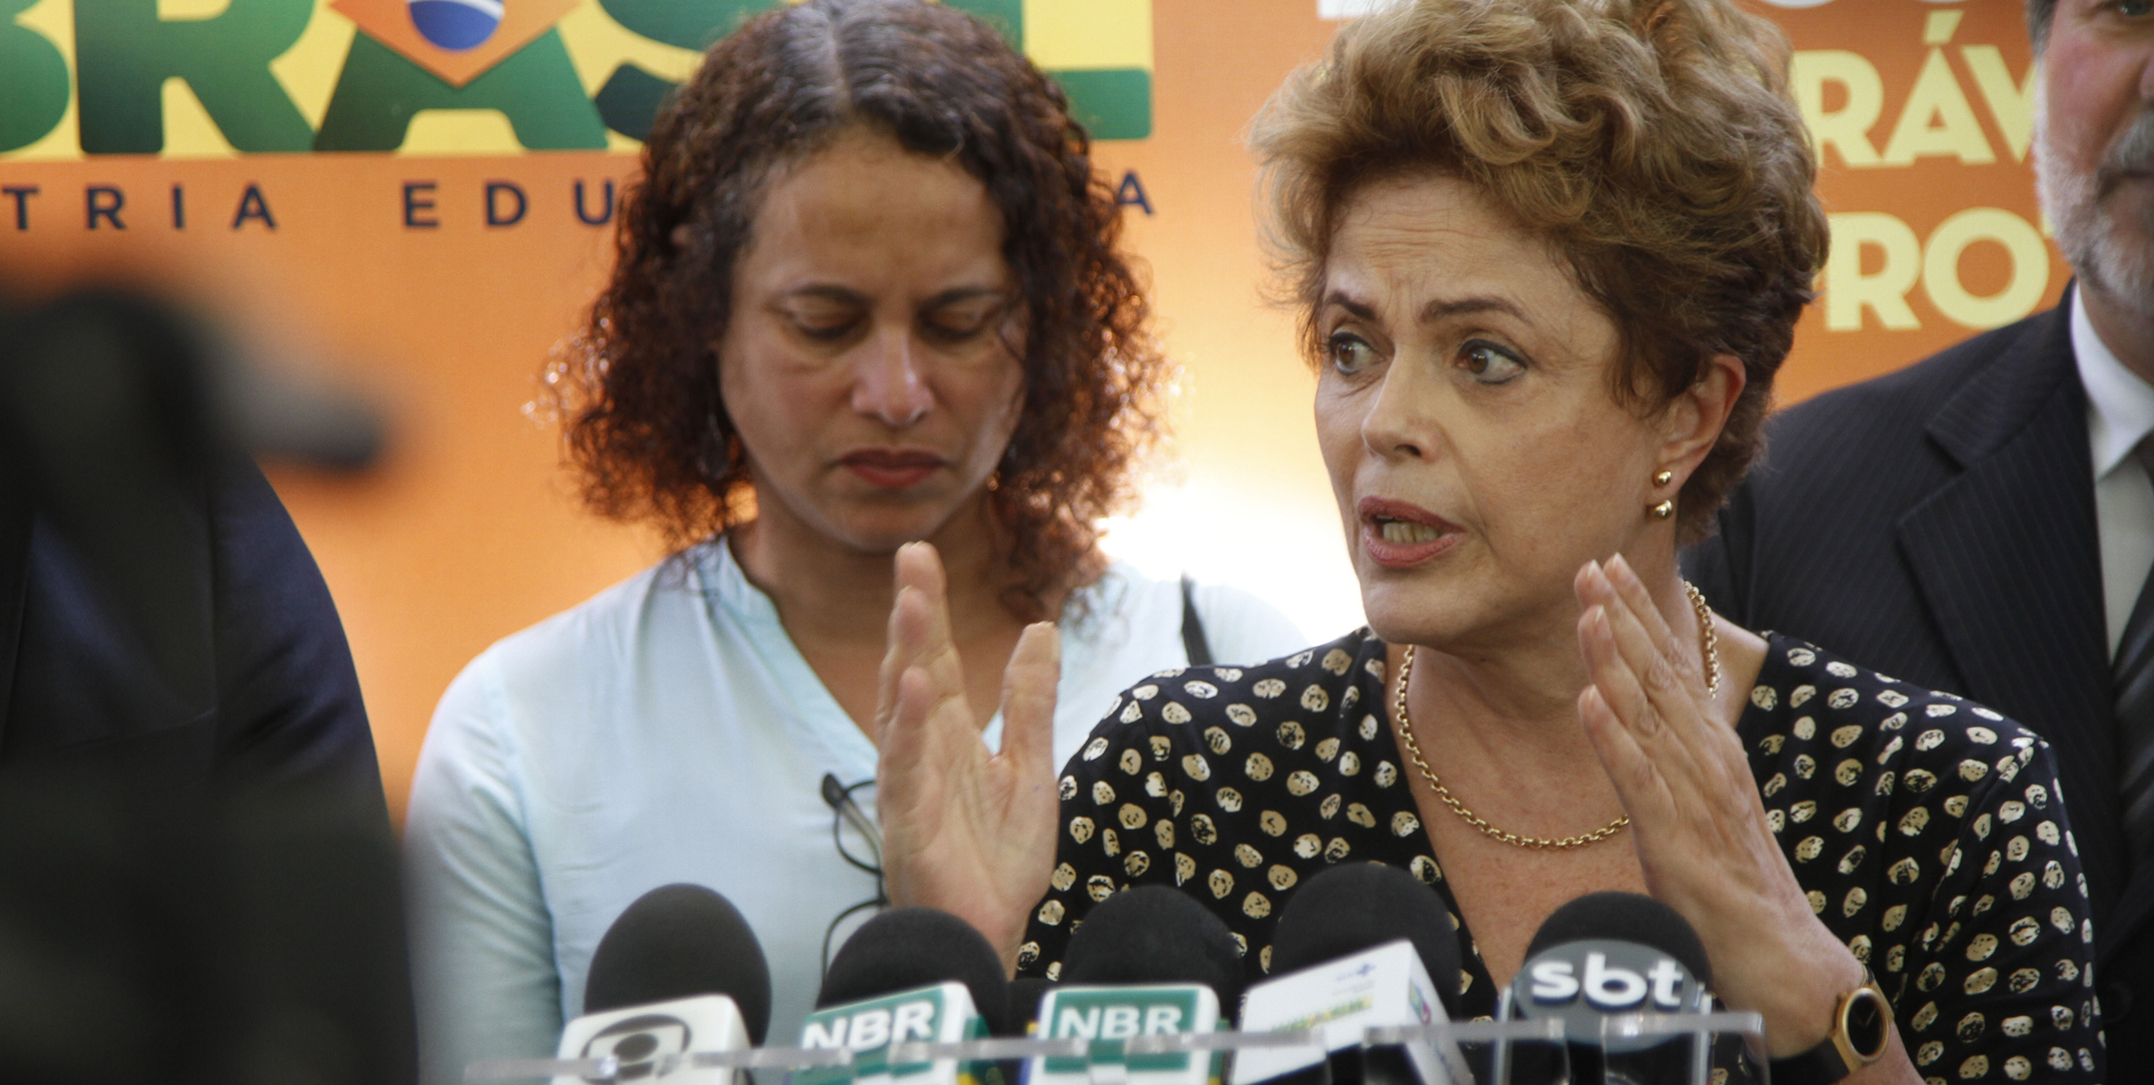 Brazilian President Dilma Rousseff gives a press conference after attending a meeting with authorities and military forces to discuss measures to combat Aedes aegypti, the mosquito responsible for transmitting the virus of dengue, chikungunya and zika to humans, in Recife, northeastern Brazil, on December 5, 2015. Zika virus is connected to cases of microcephaly in 16 Brazilian states. Photo: Ricardo B. Labastier/JC Imagem/Estadao Conteudo. (Agencia Estado via AP Images)